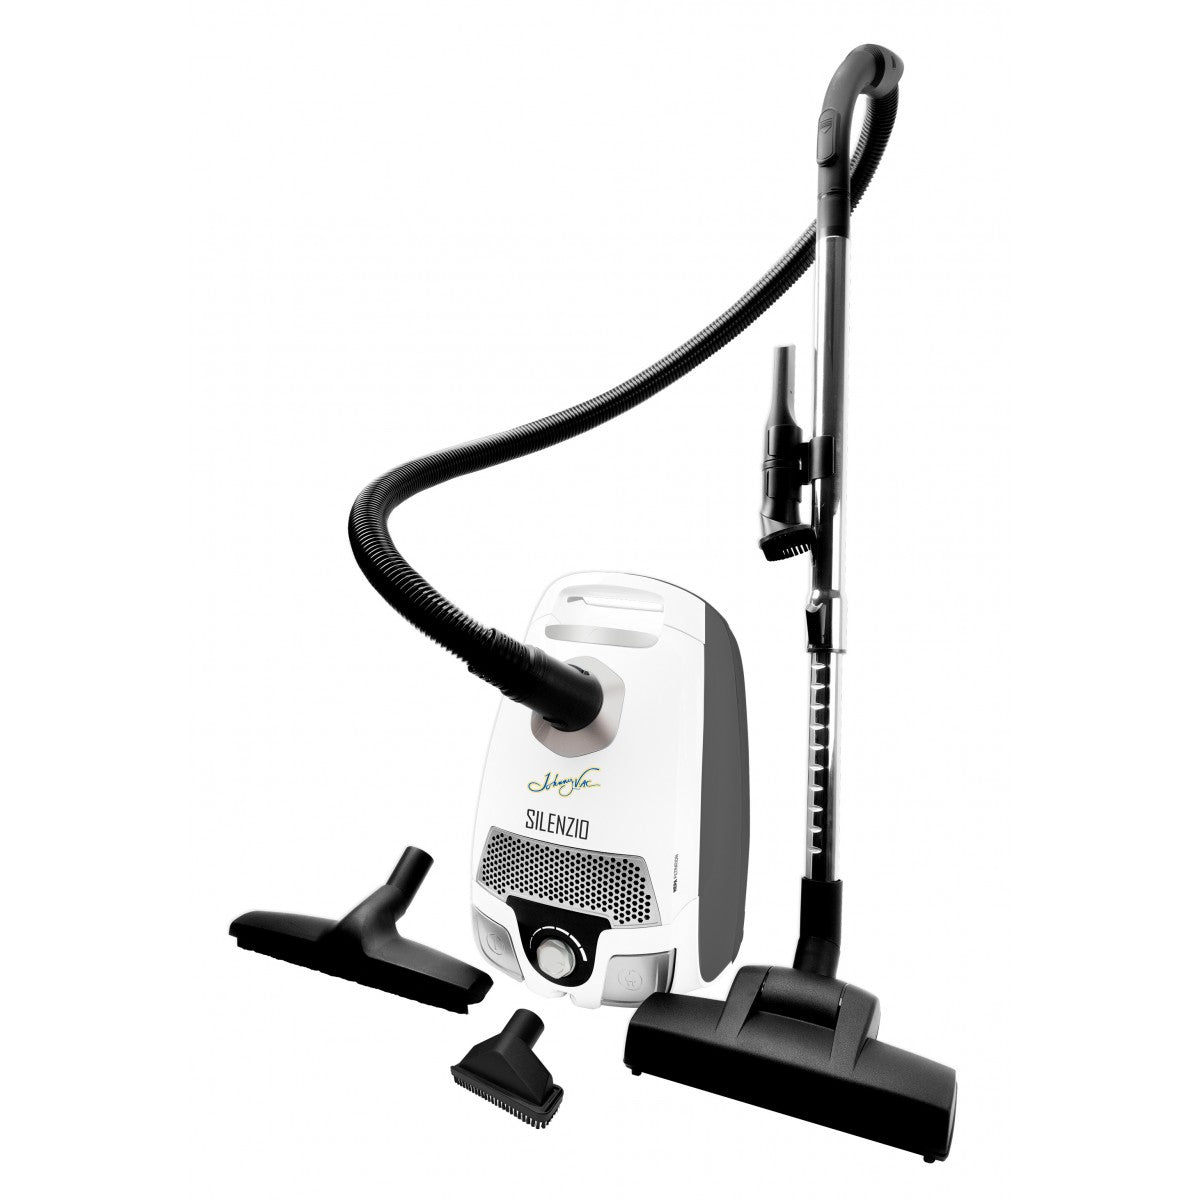 Johnny Vac Silenzio Canister Vacuum with HEPA Filtration and Variable Suction Control